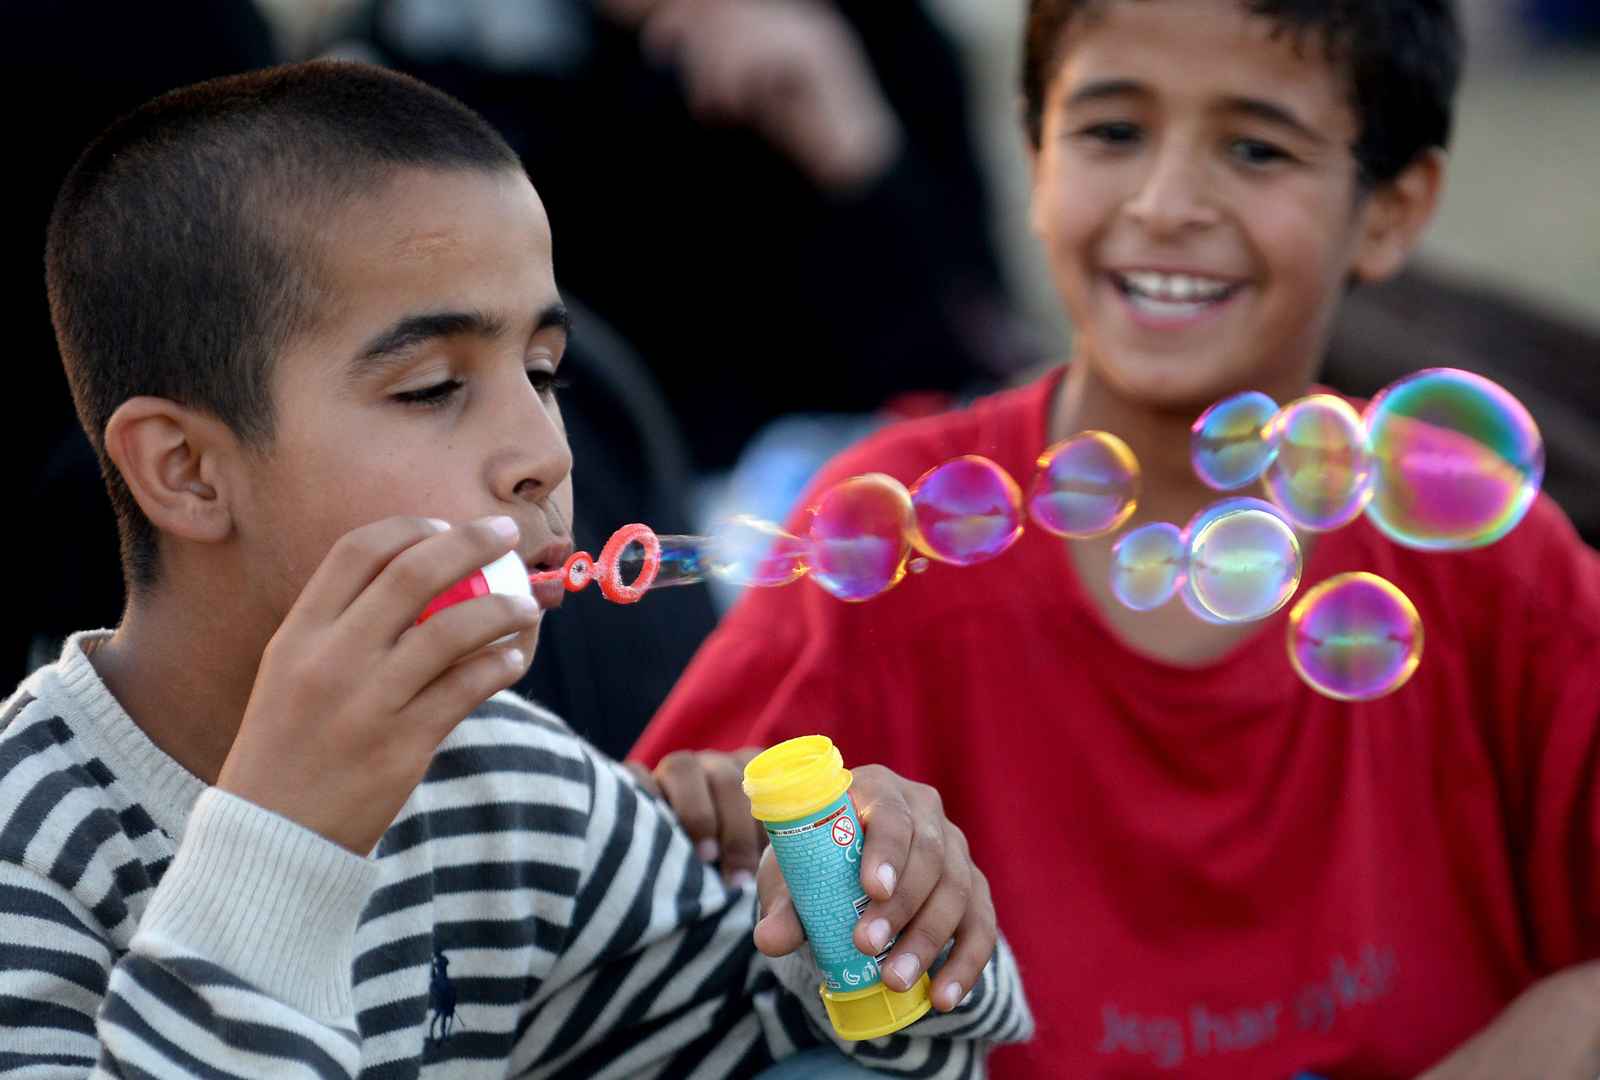 epaselect epa04937488 A migrant child blows bubbles made from soap and water while waiting at a registration camp after they crossed the border between Greece and Macedonia near the city of Gevgelija, The Former Yugoslav Republic of Macedonia, 18 September 2015. Thousands of migrants continue to arrive in Macedonia, on their way to Serbia, Croatia and EU countries. Hungary on 15 September sealed the last gap in the barricade along its border with Serbia, closing the passage to thousands of refugees and migrants still waiting on the other side.  EPA/Nake Batev